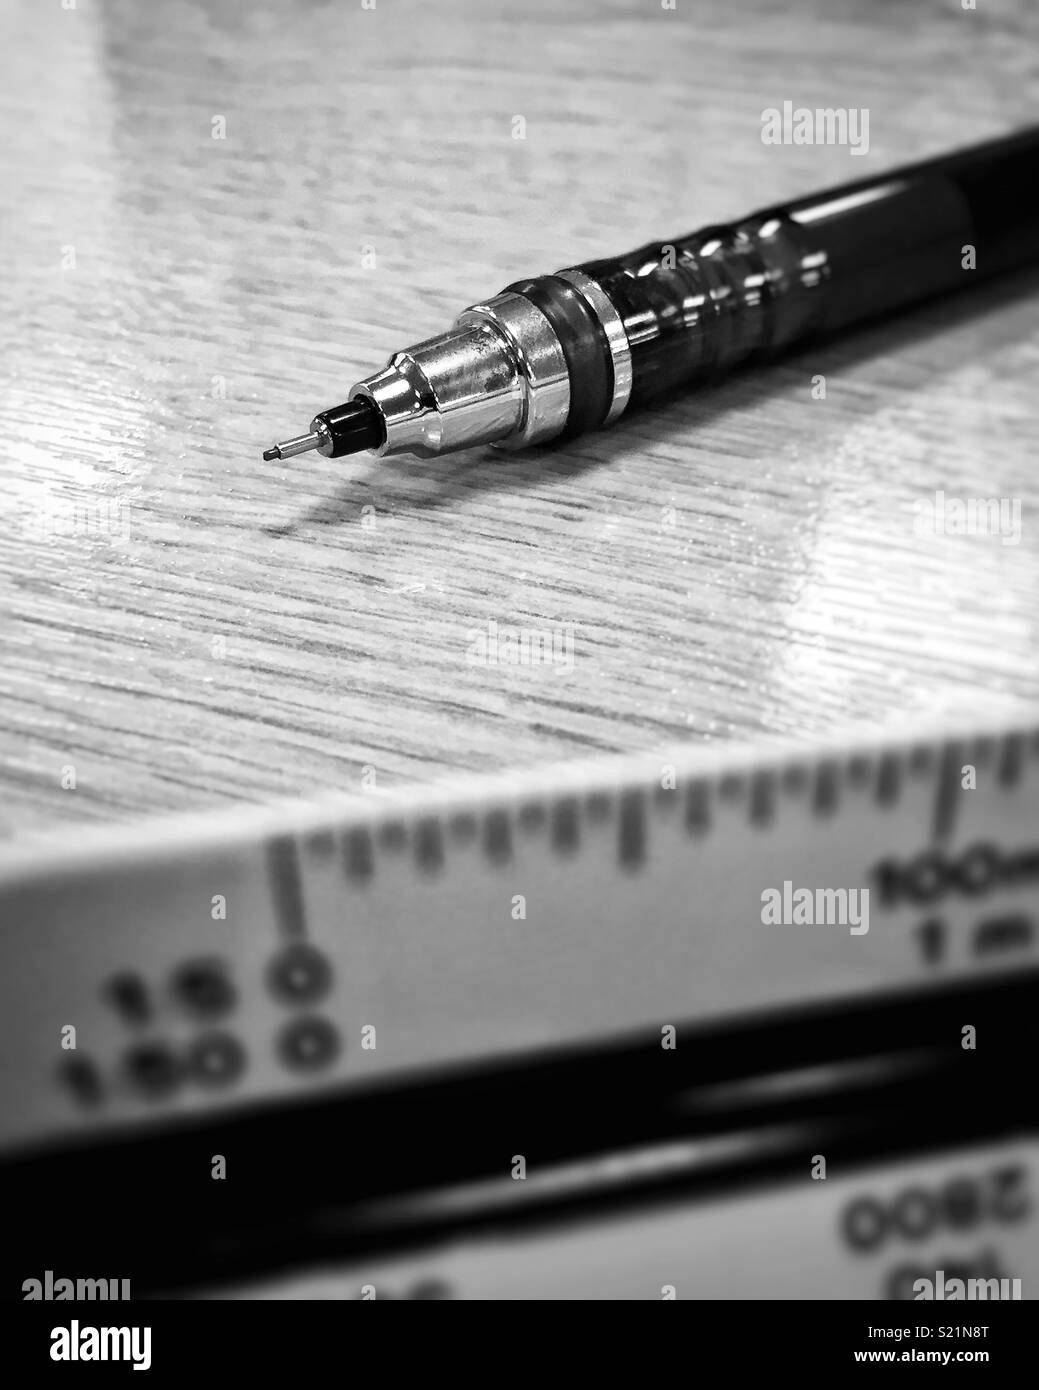 Pen and scale rule Stock Photo